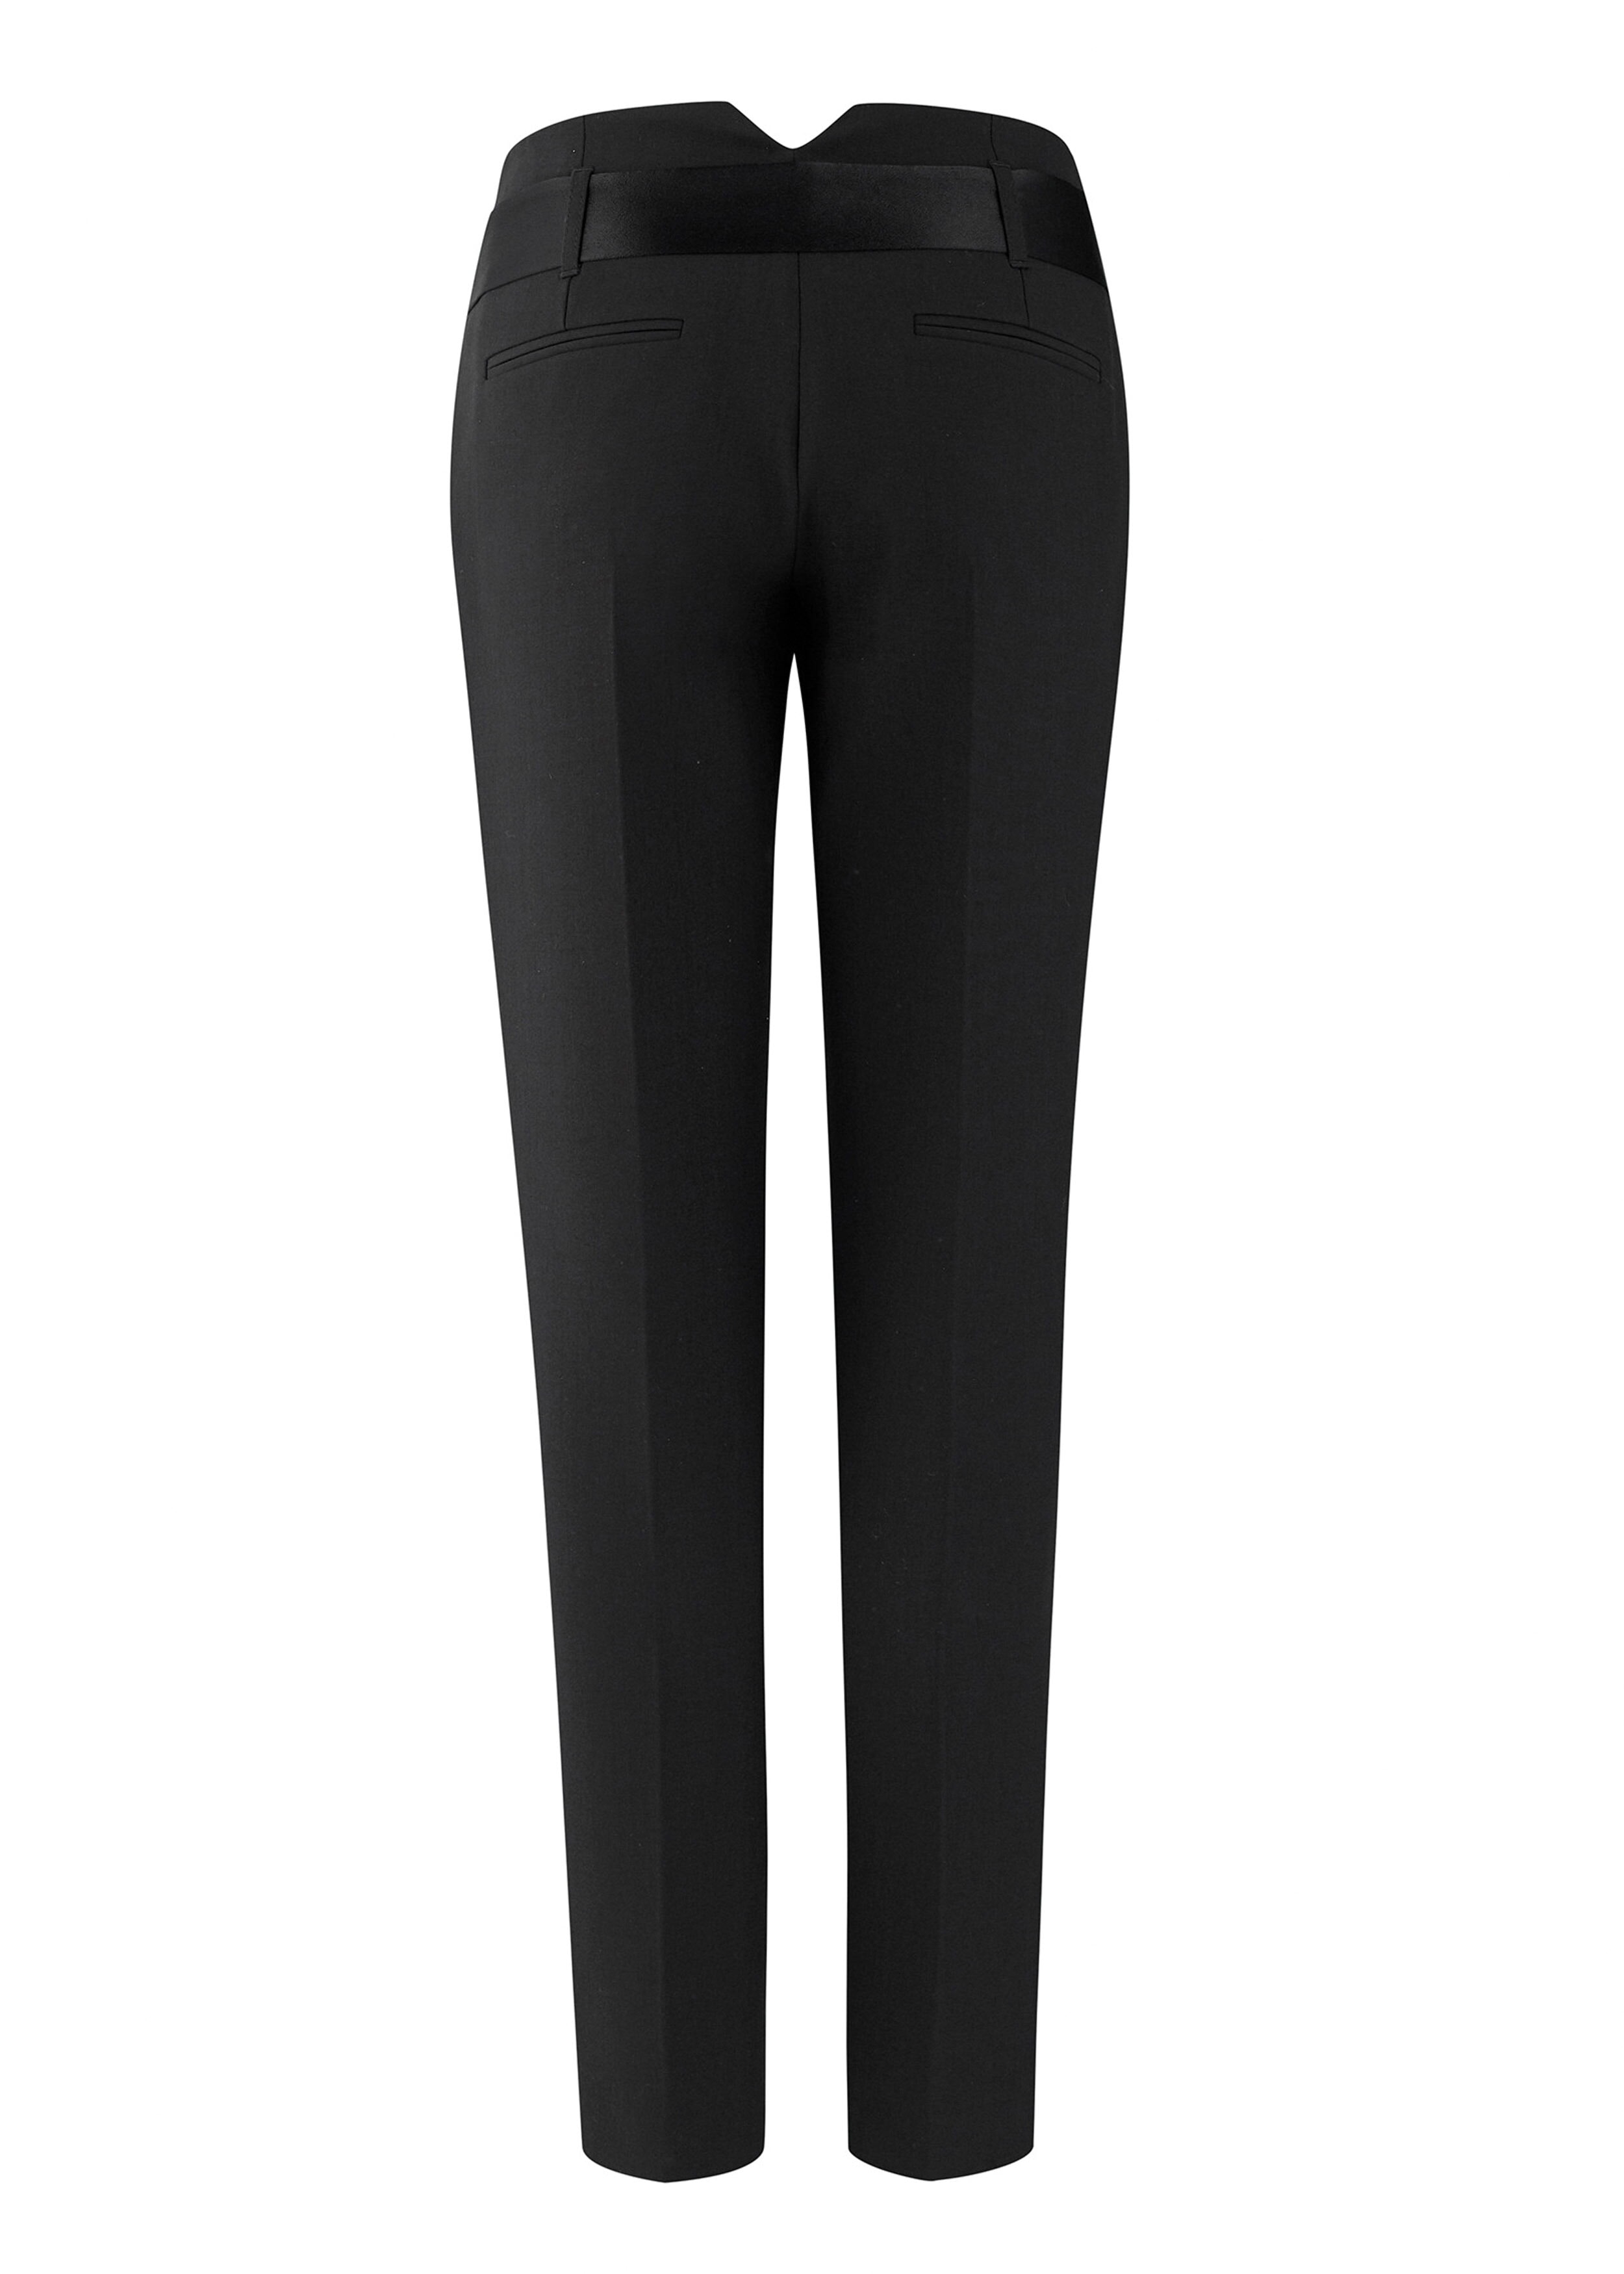 Gold Piping Trouser Black